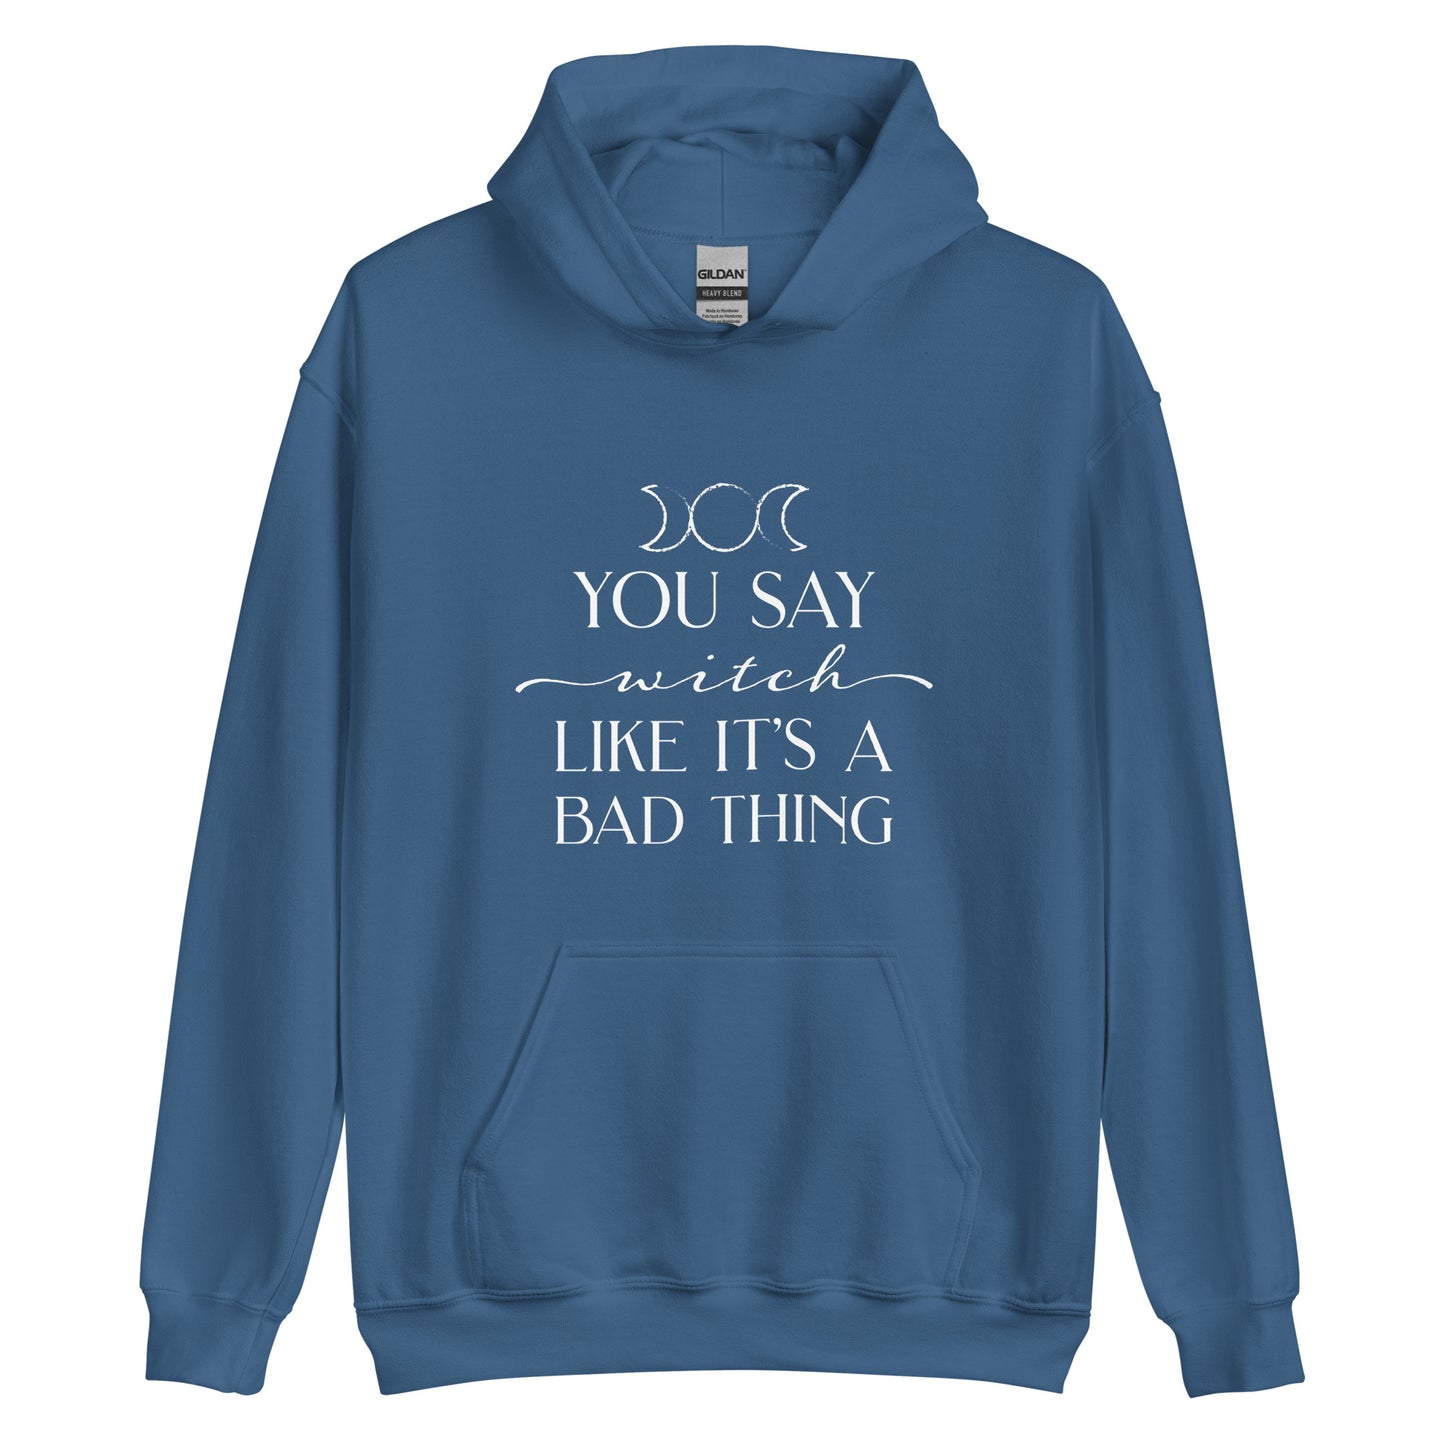 A blue hooded sweatshirt featuring the triple goddess symbol and text reading "You say witch like it's a bad thing"